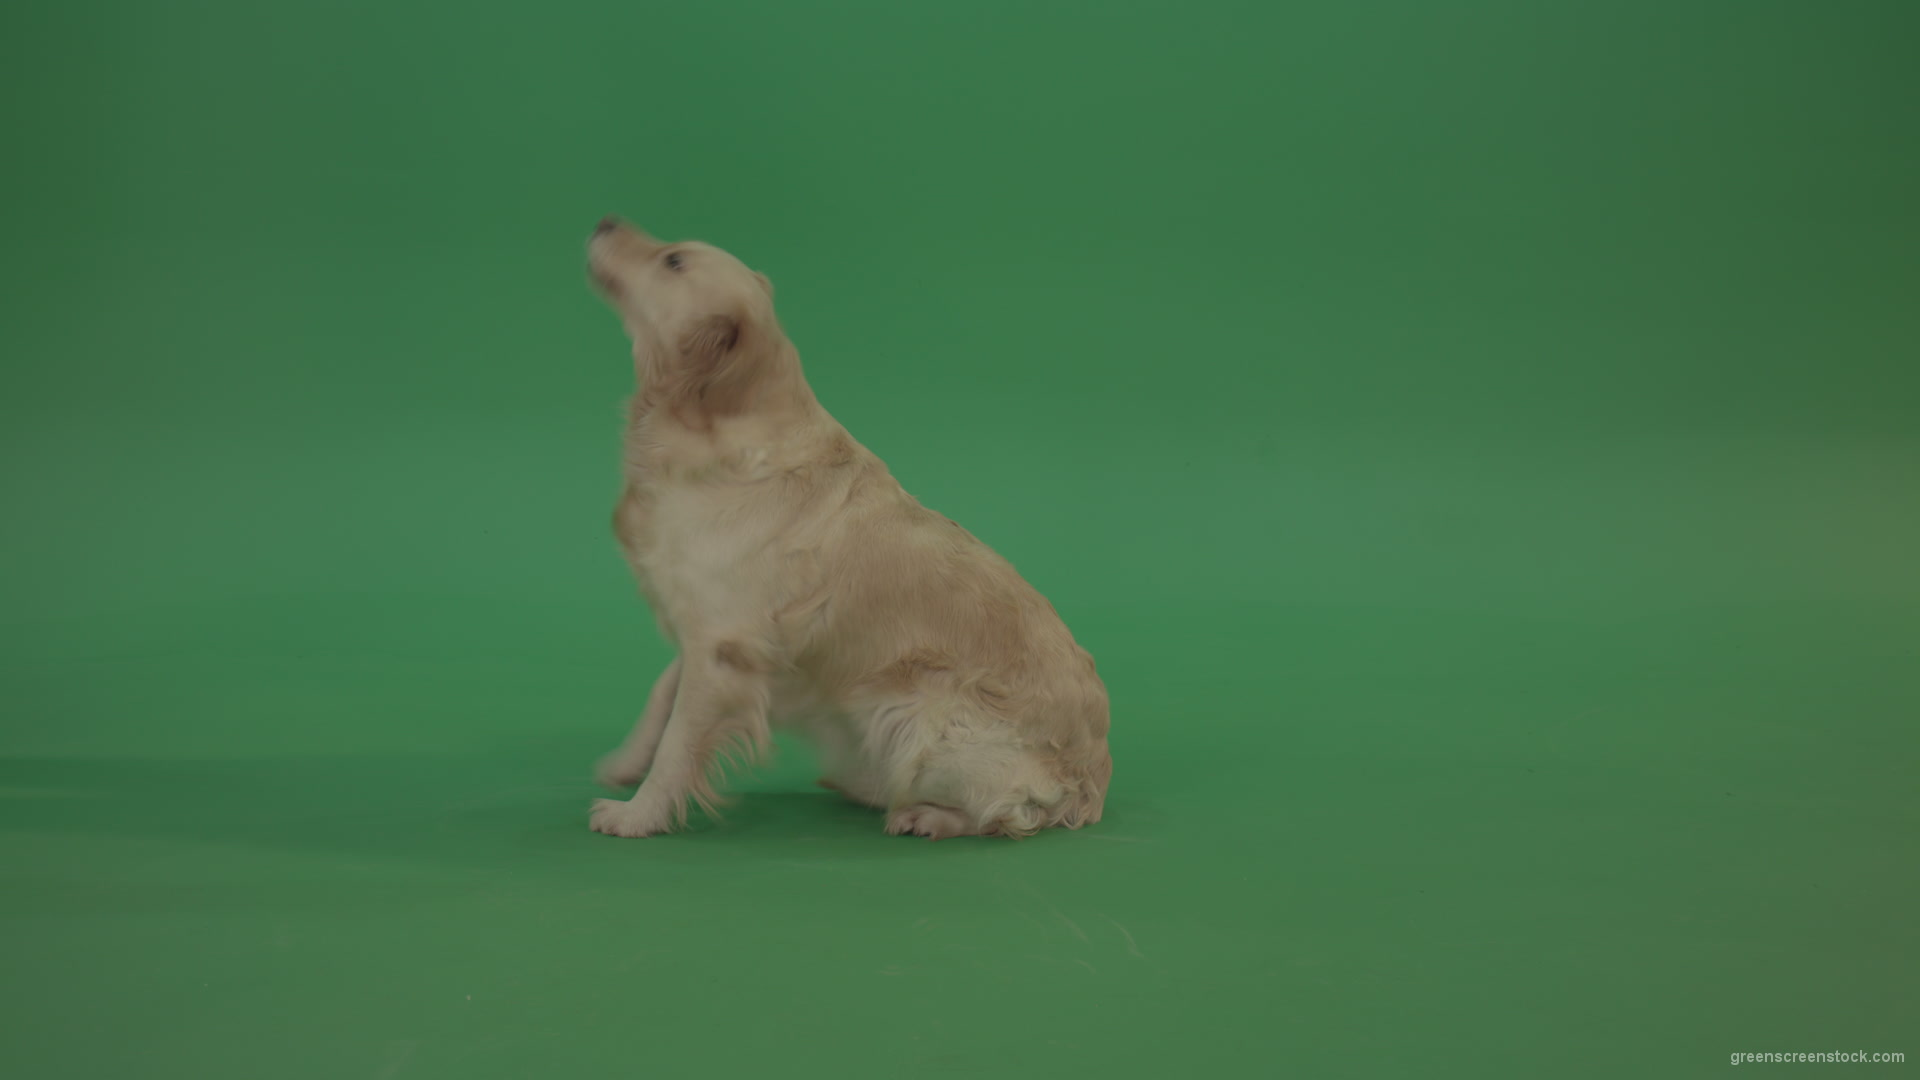 Golden-Retriever-green-screen-dog-in-side-view-barking-isolated-on-chromakey-green-background_004 Green Screen Stock